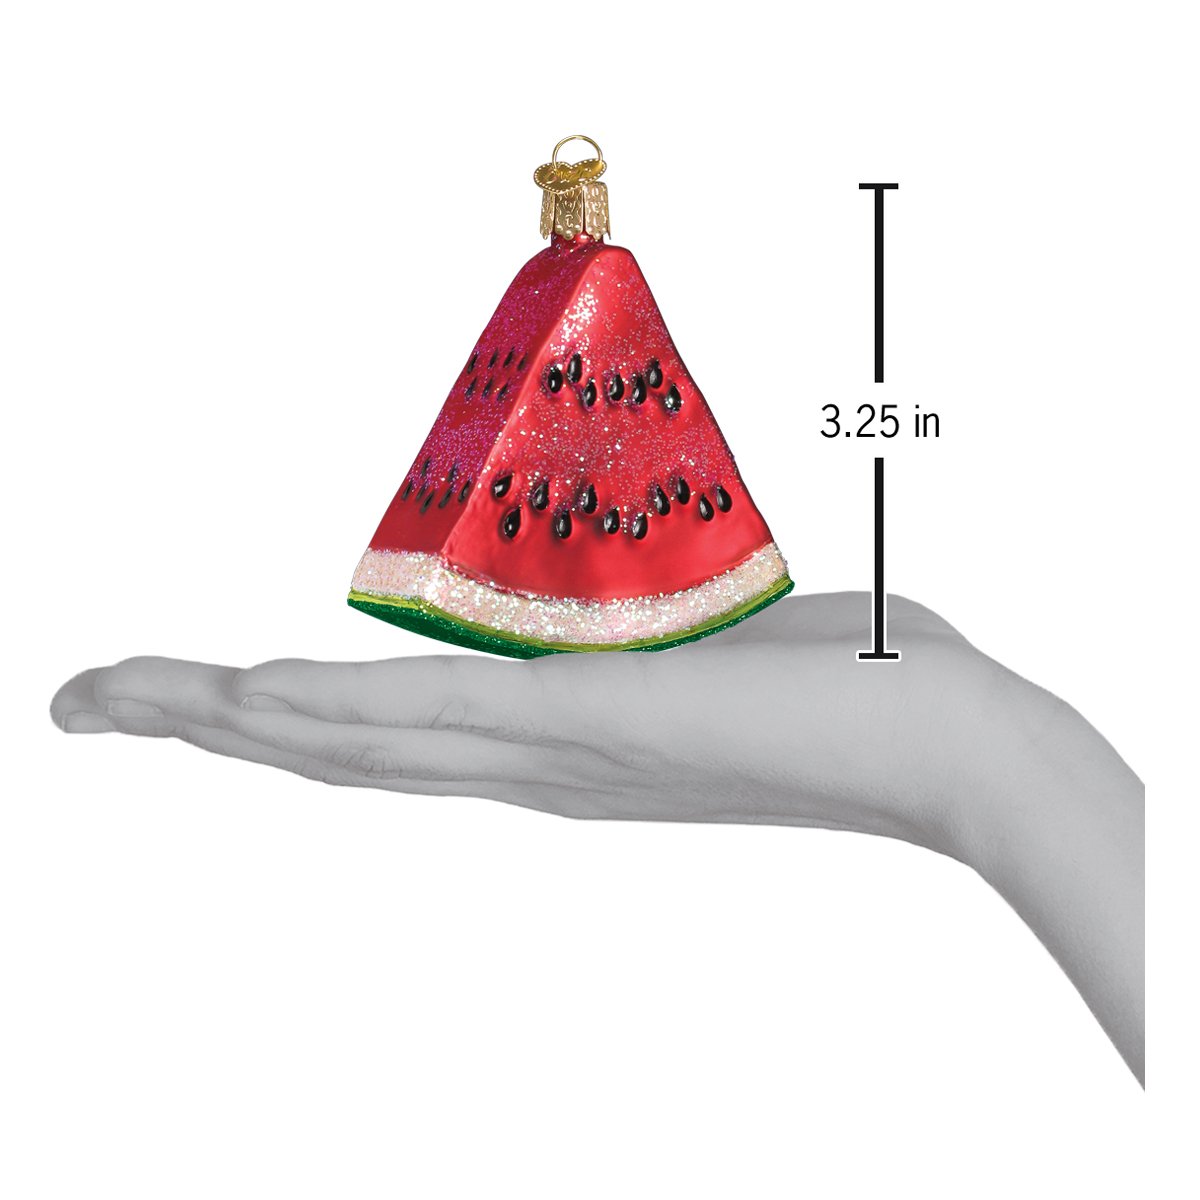 Old World Christmas Watermelon Wedge Ornament    